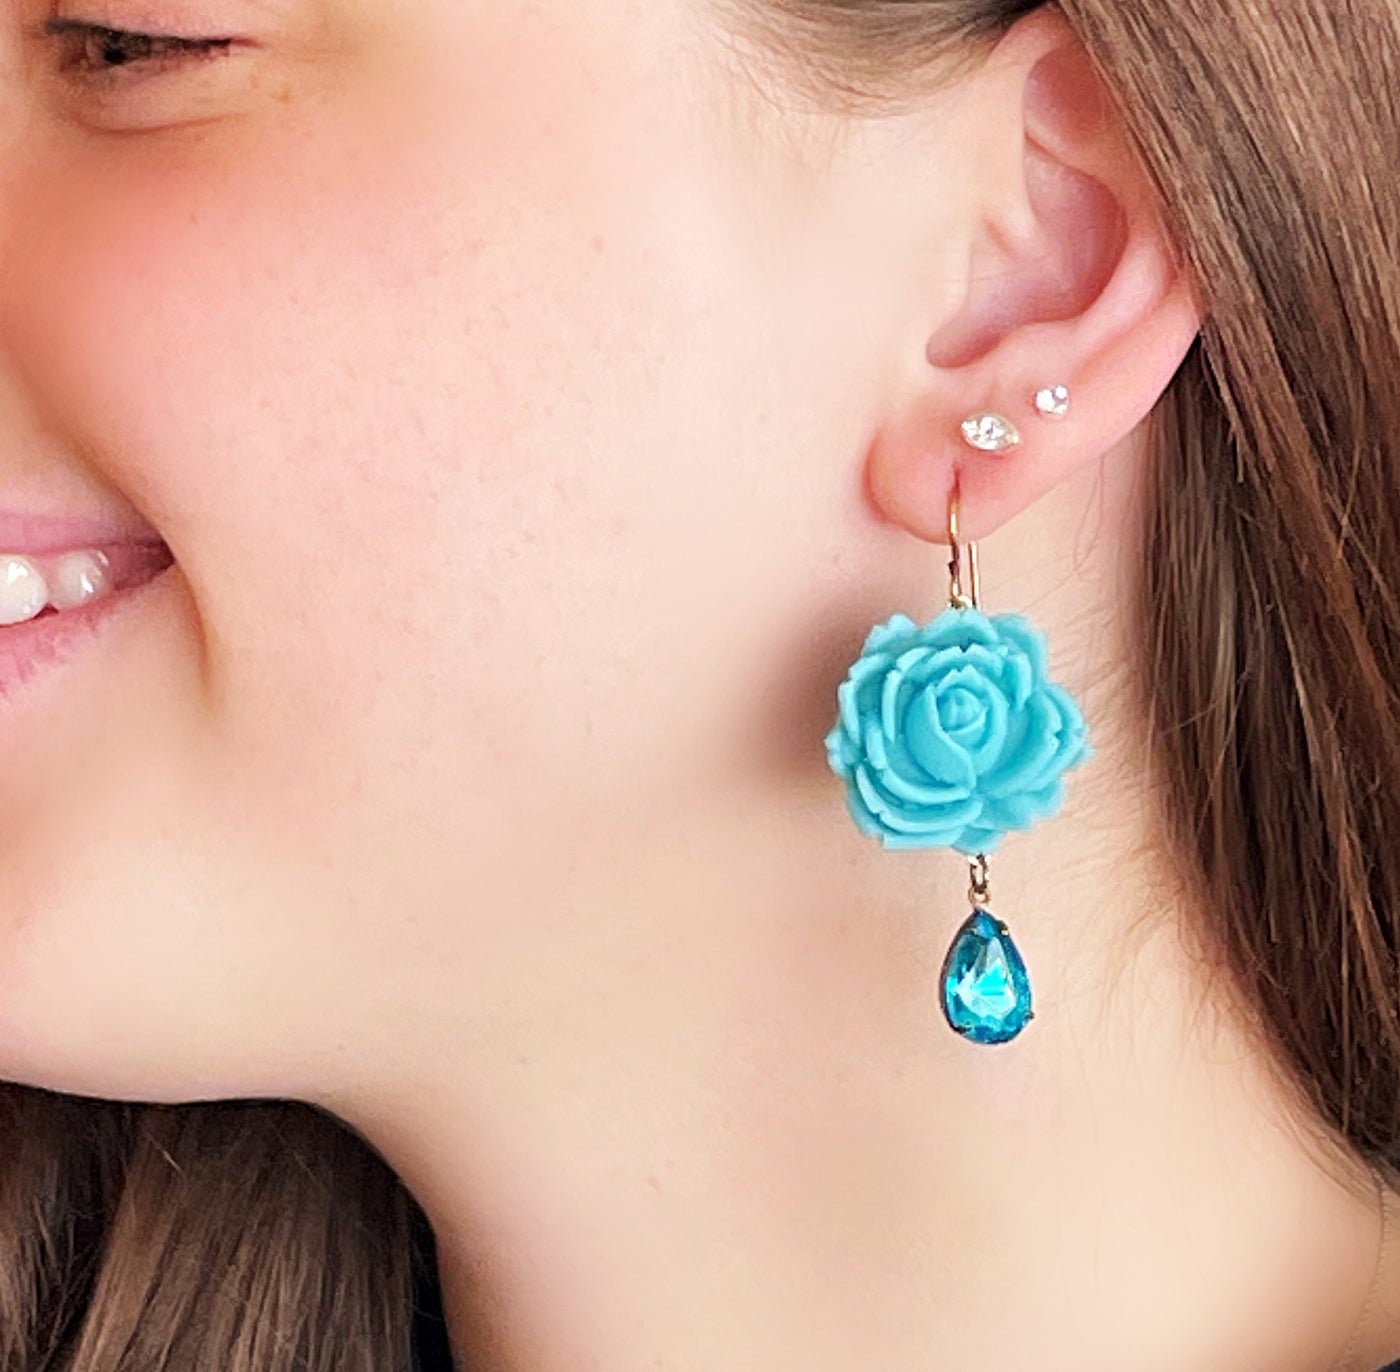 Turquoise Rose Earrings with Crystal Teardrops